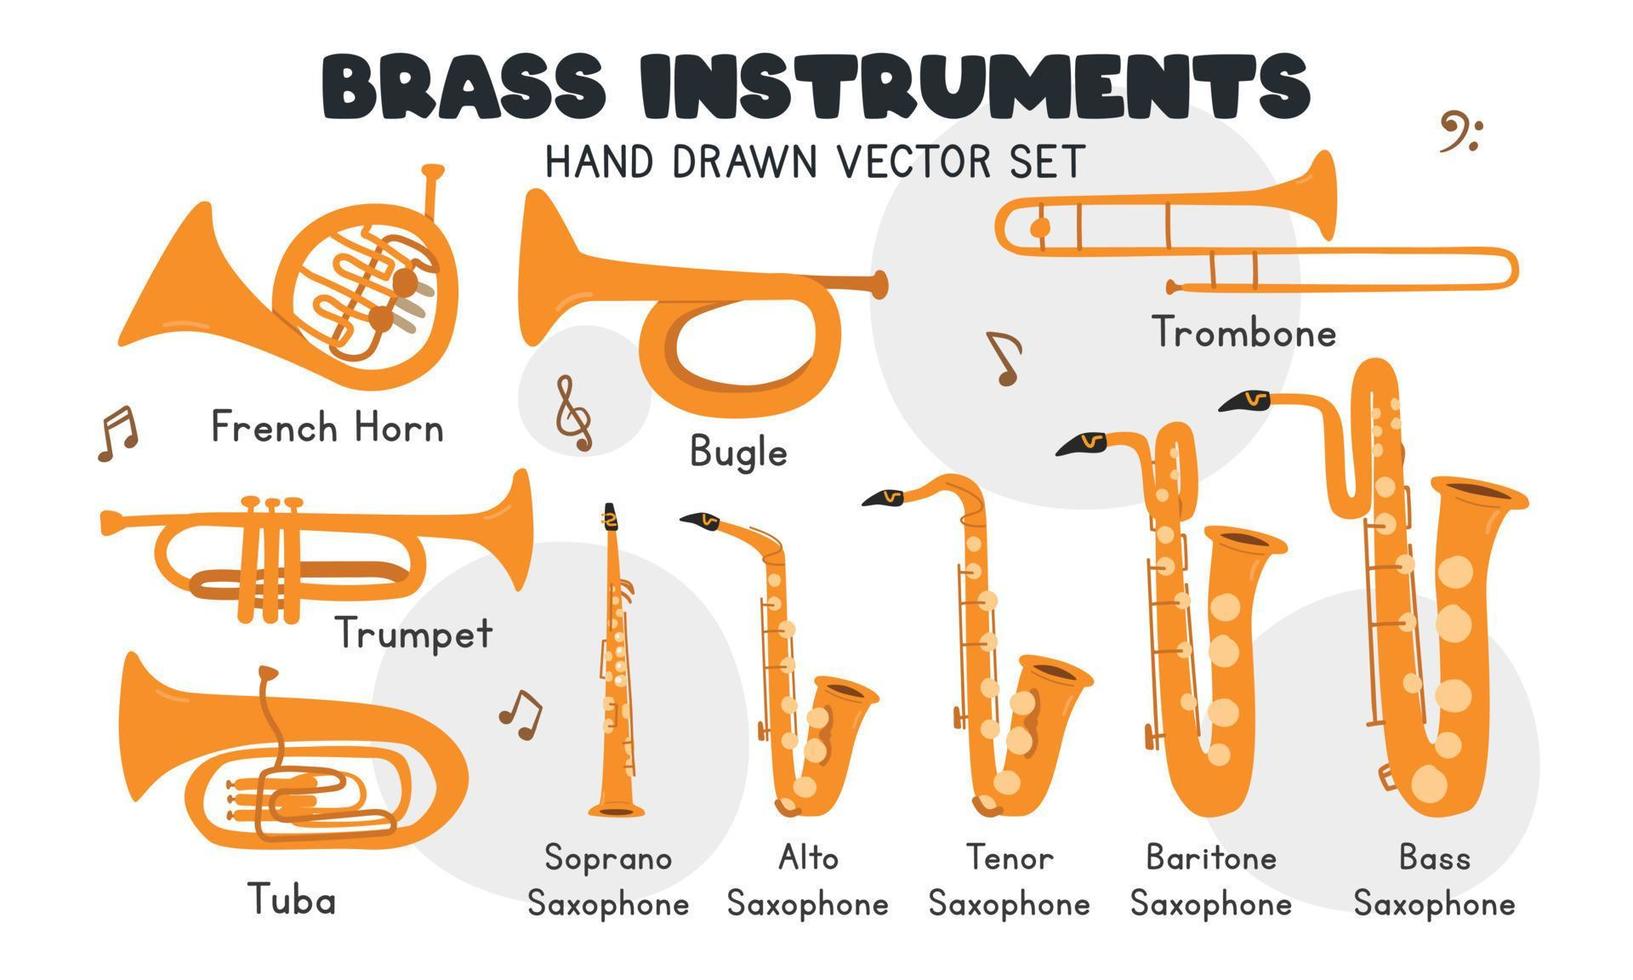 Brass instruments vector set. Simple cute trumpet, bugle, trombone, tuba, saxophone, french horn brass musical instrument clipart cartoon style. Wind instrument trumpet hand drawn doodle style